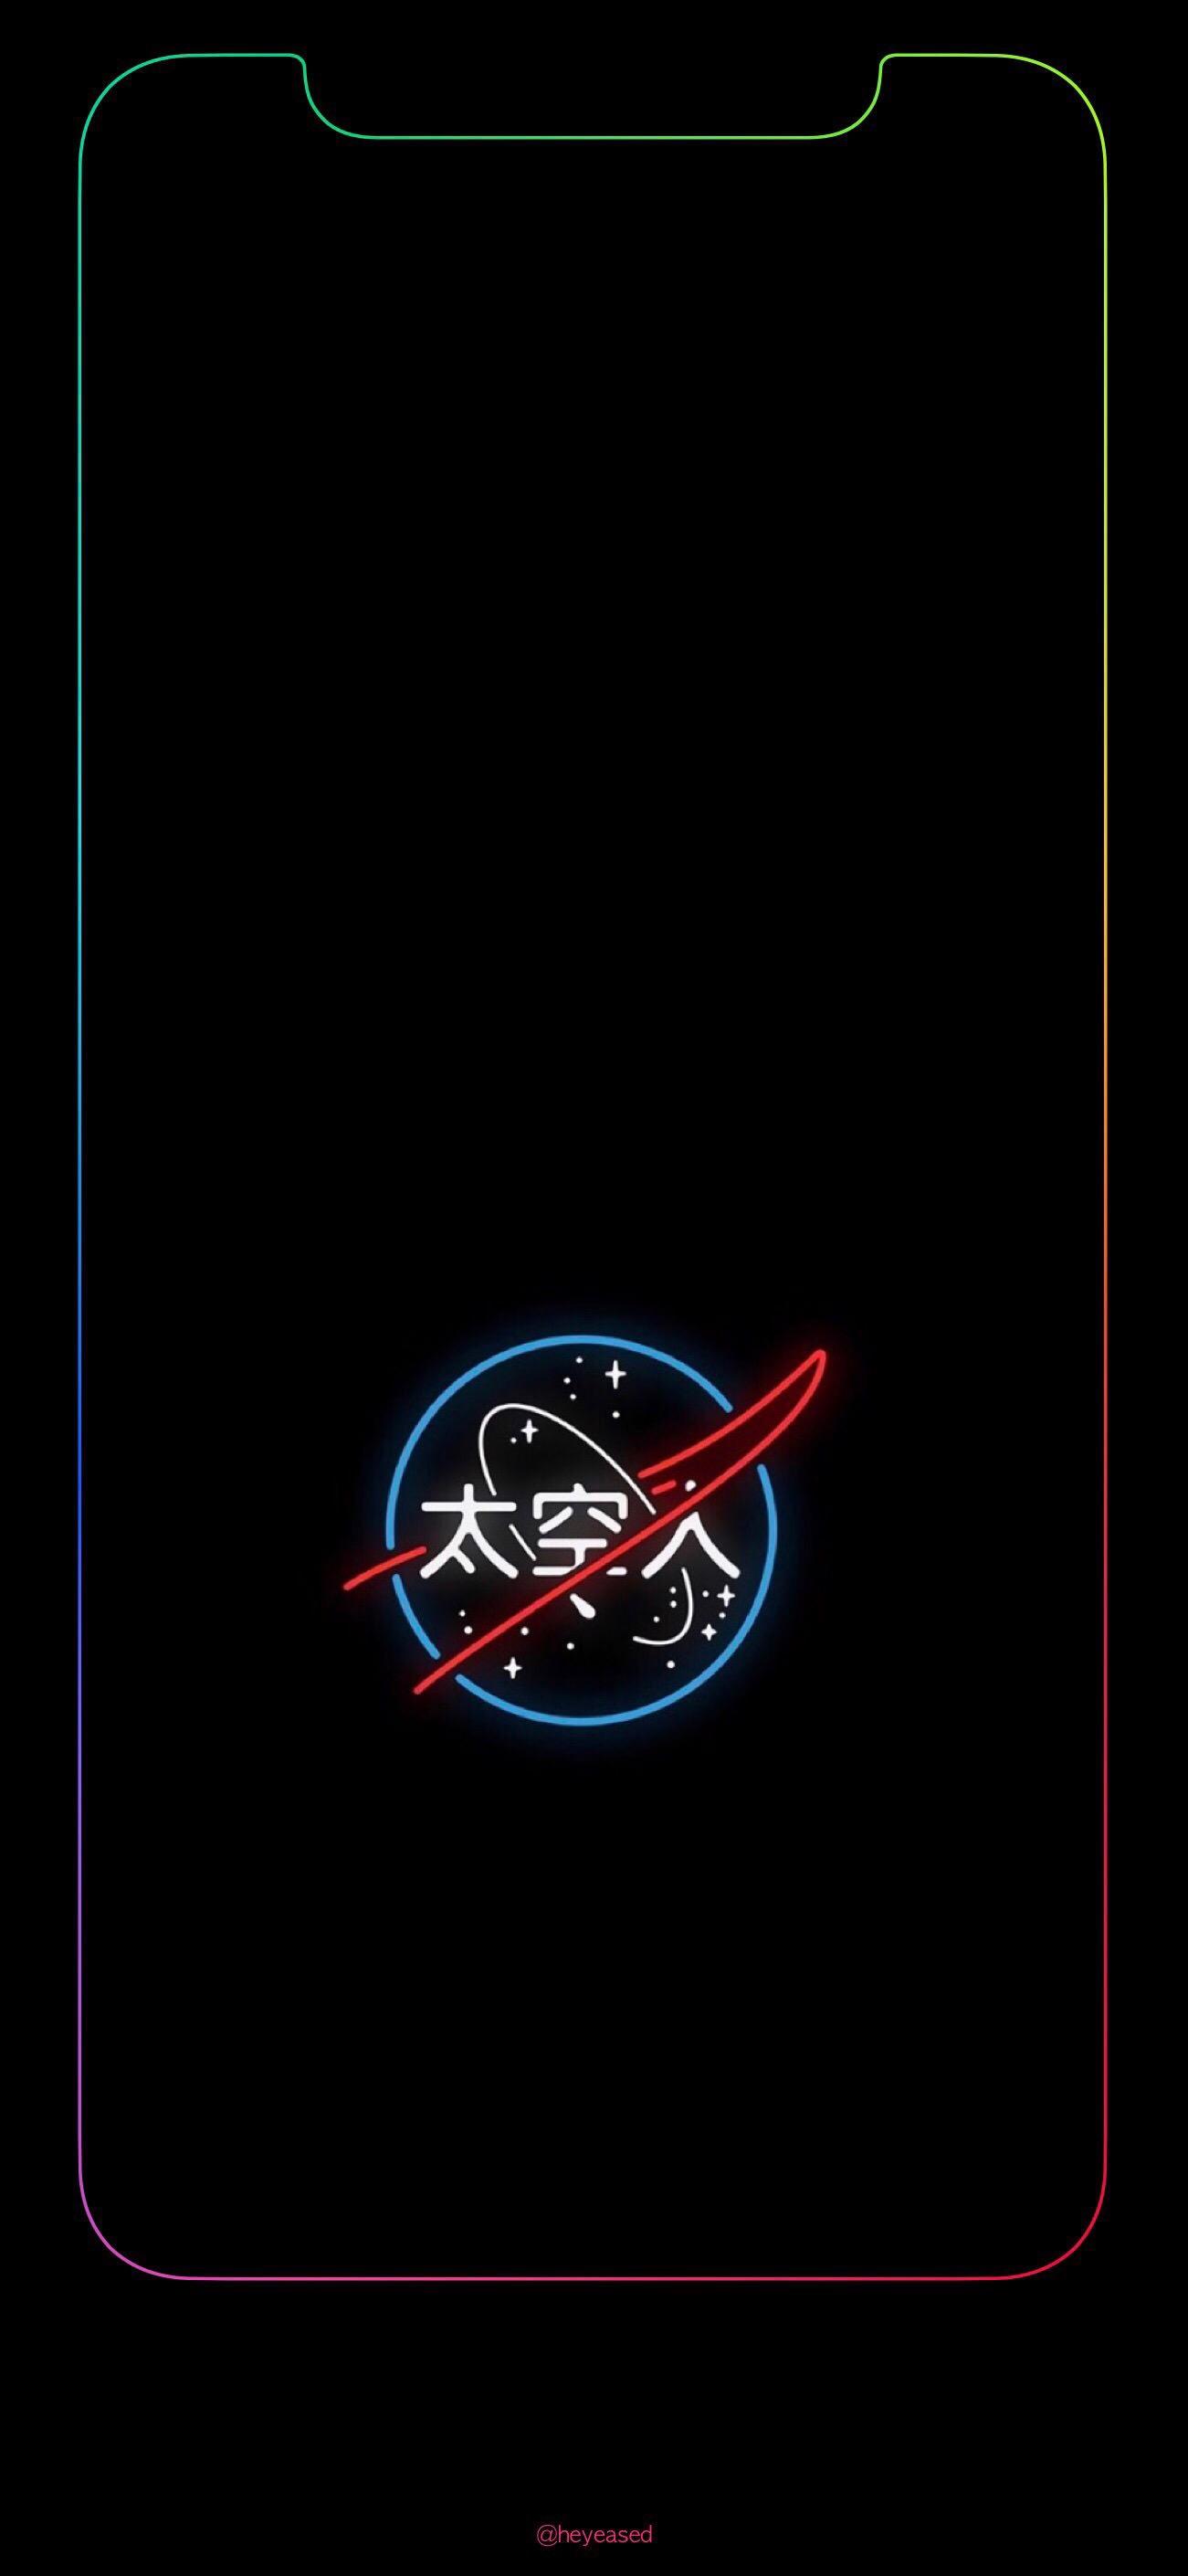 NASA with iPhone X Bezels [1125x2436]